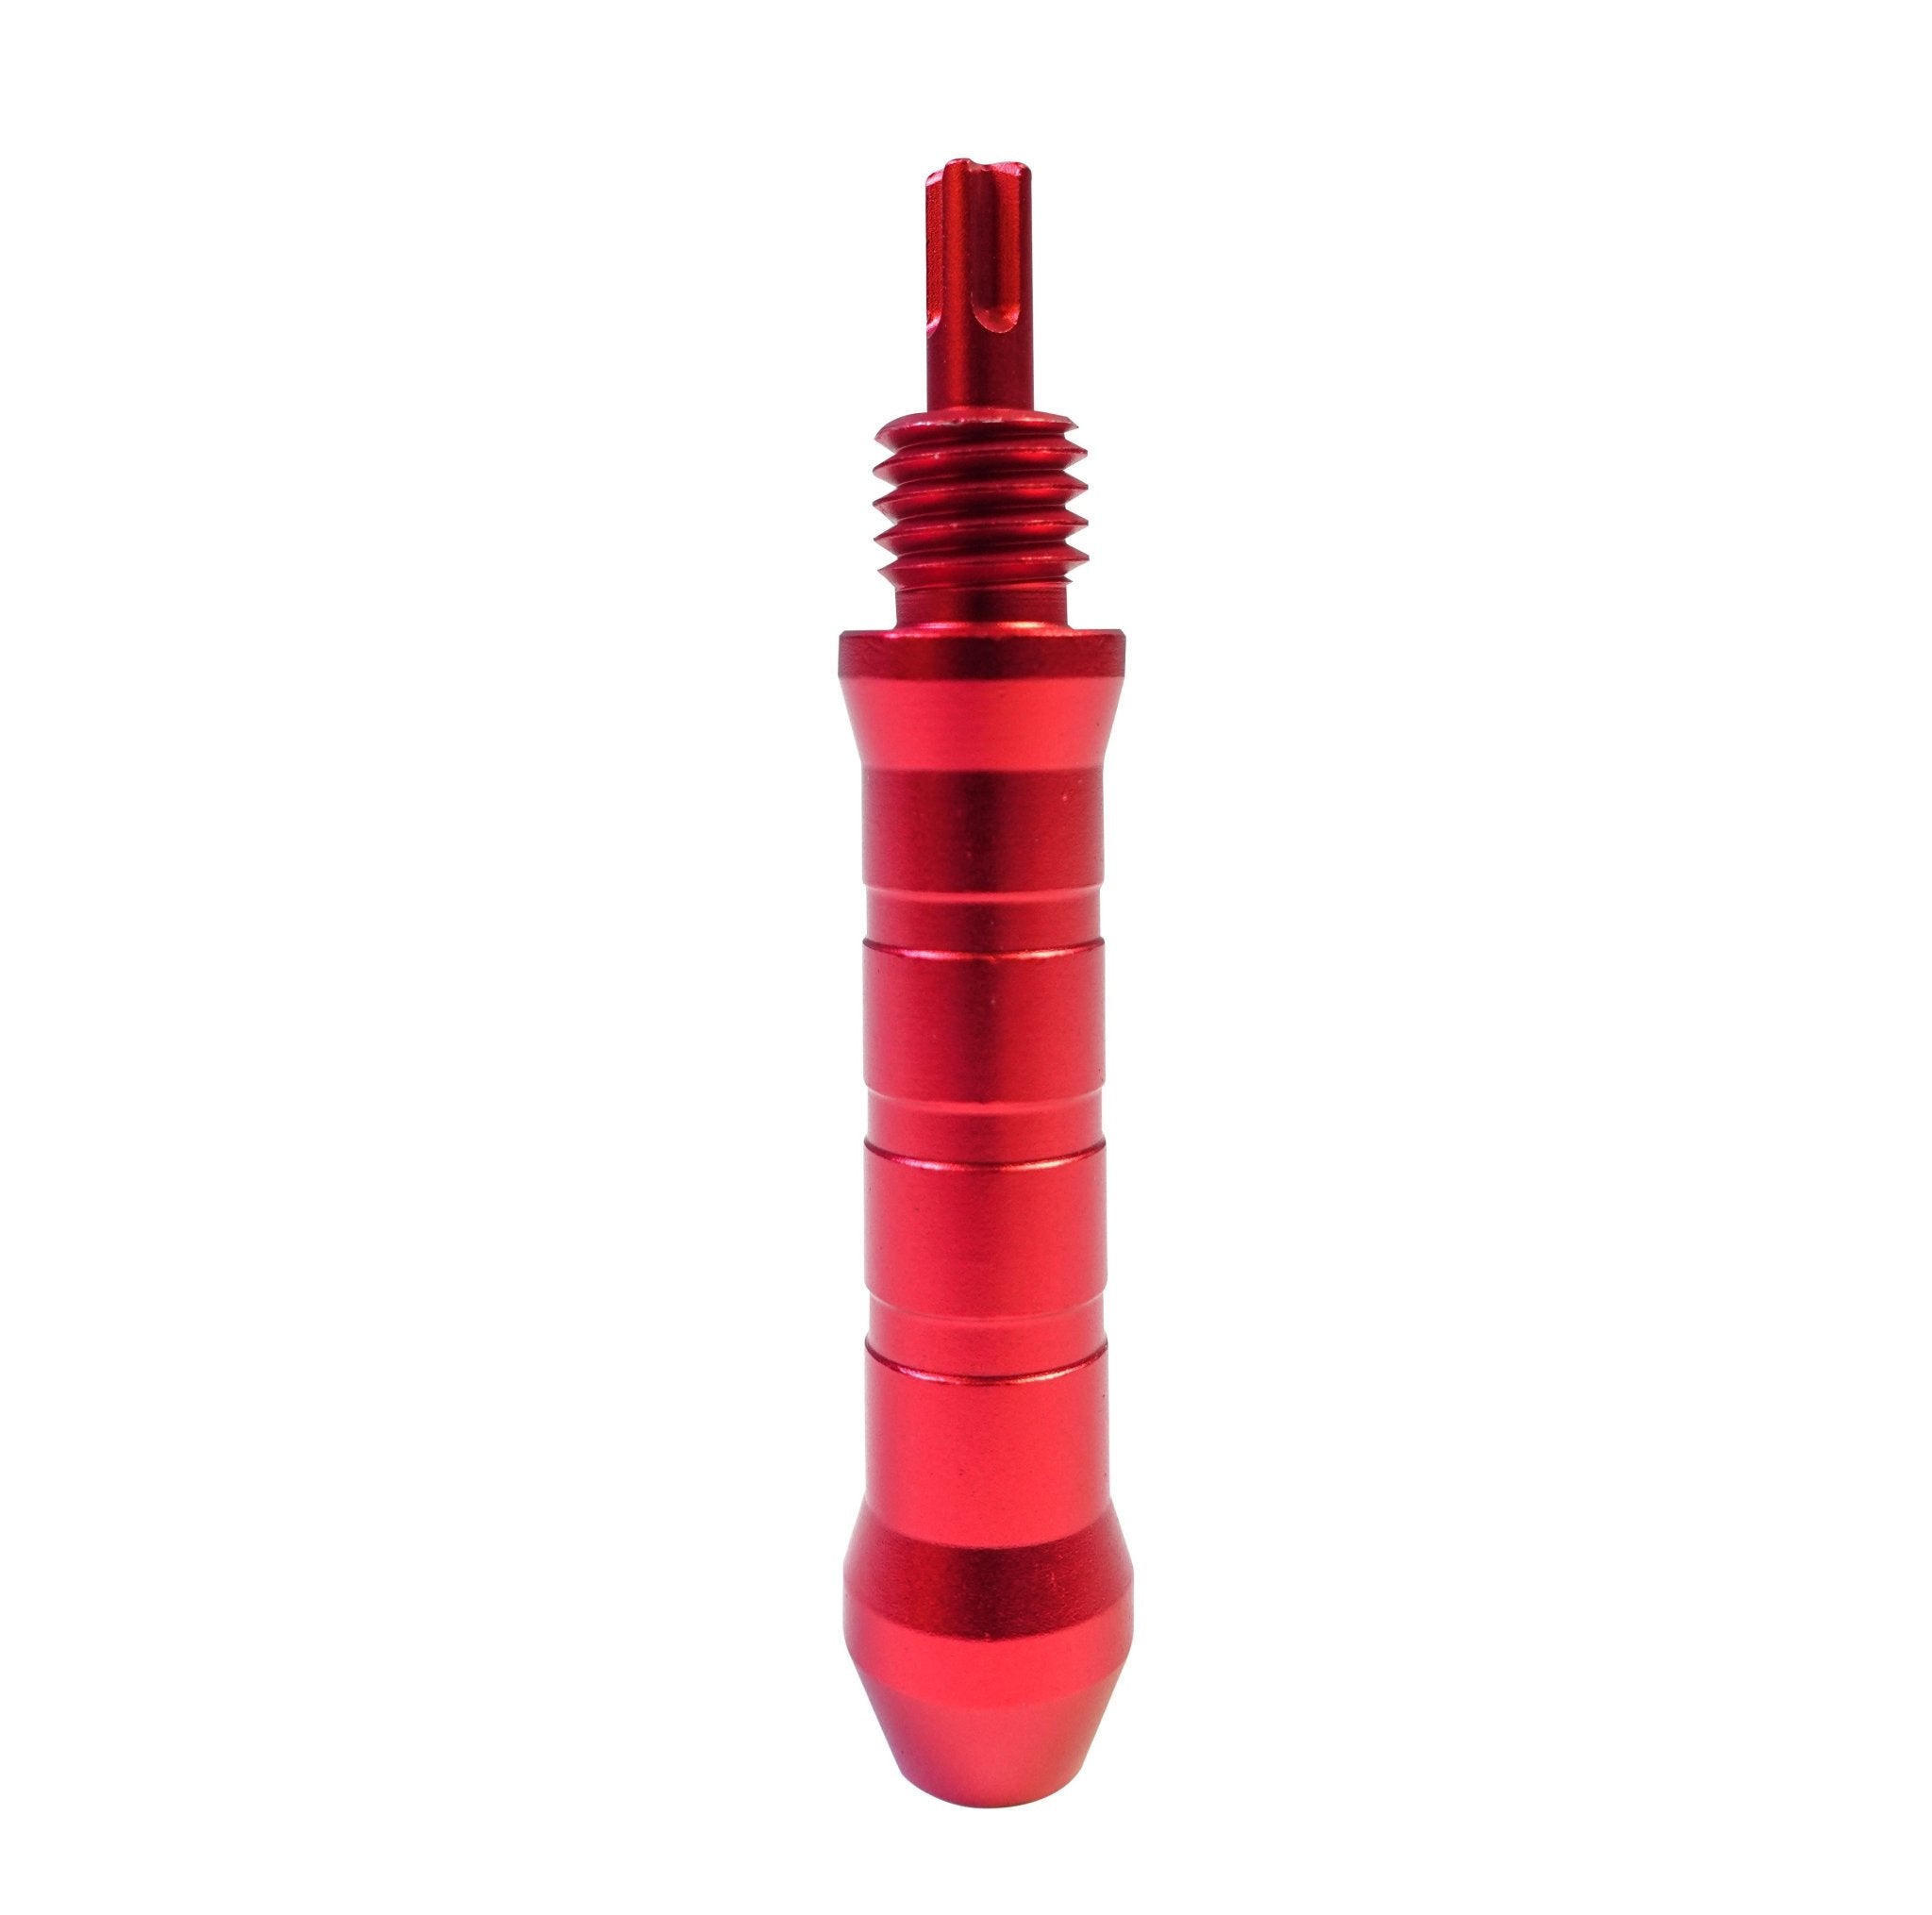 Keycap Puller 3-in-1 For Mechanical Keyboard - Red - مزيل مفاتيح - Store 974 | ستور ٩٧٤